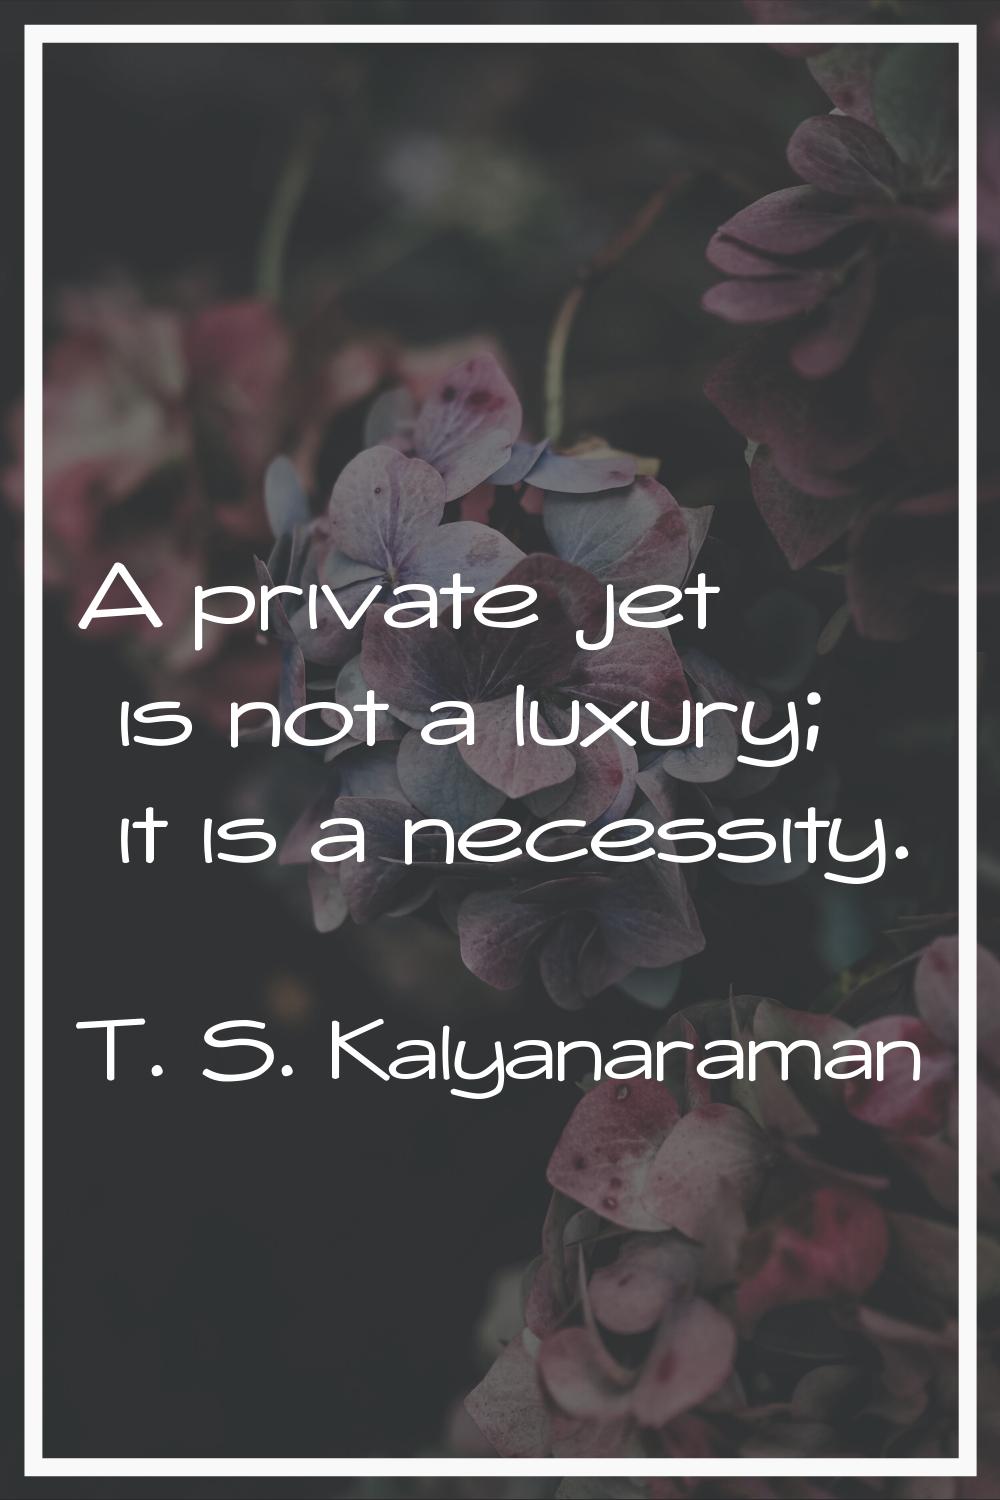 A private jet is not a luxury; it is a necessity.